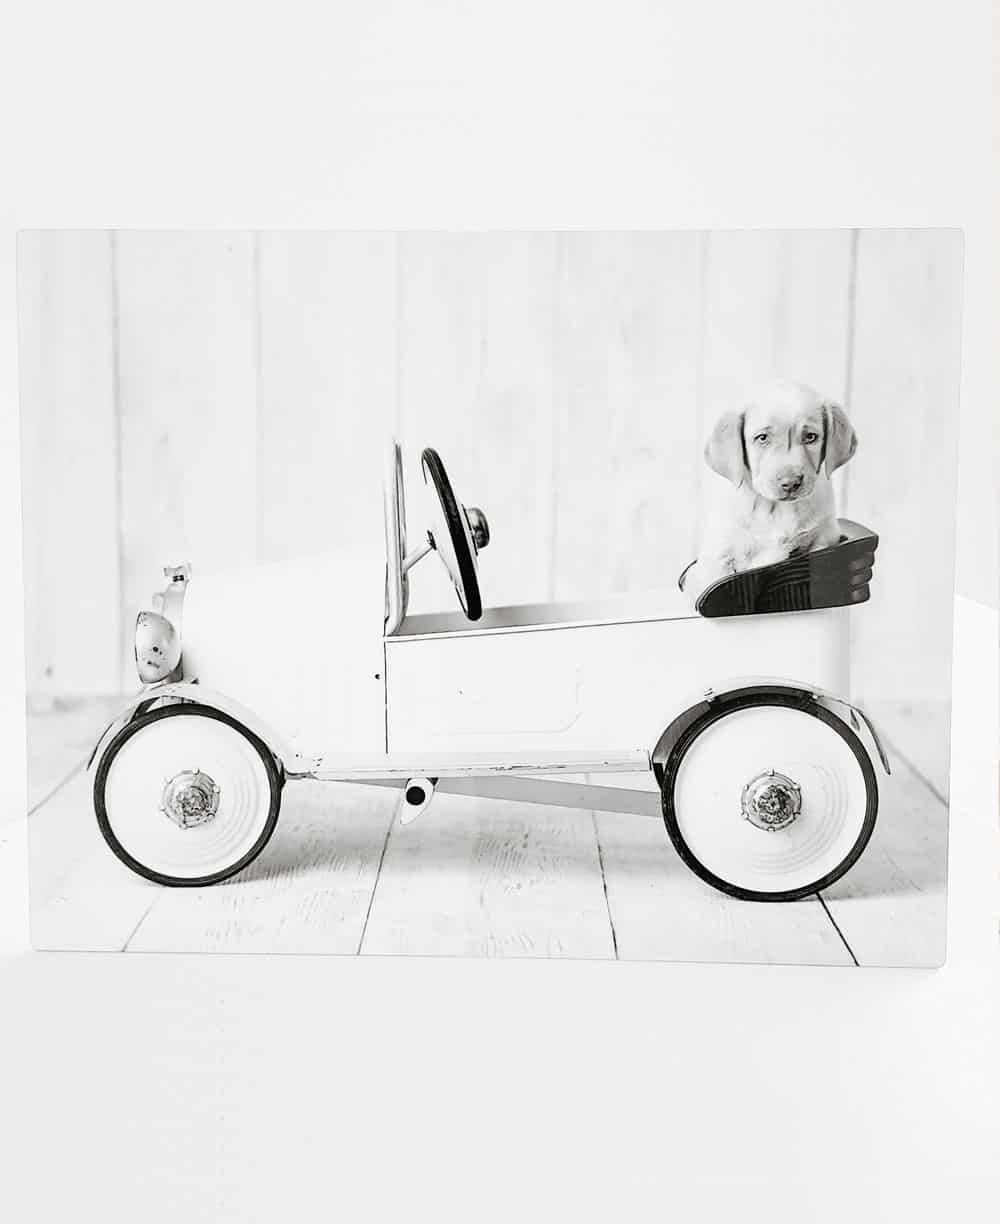 Puppy photo printed in black and white on an gloss metal print